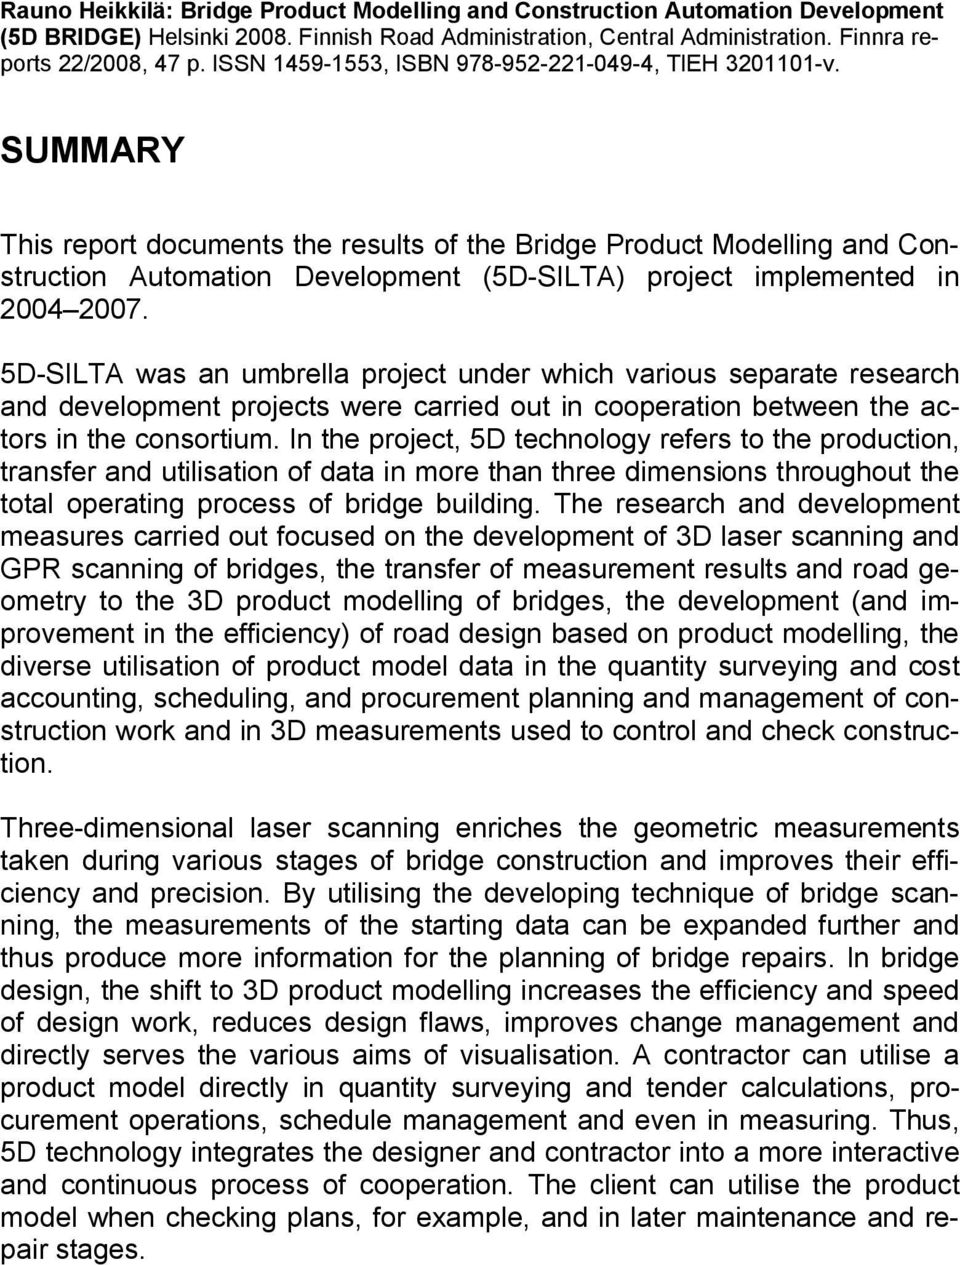 SUMMARY This report documents the results of the Bridge Product Modelling and Construction Automation Development (5D-SILTA) project implemented in 2004 2007.